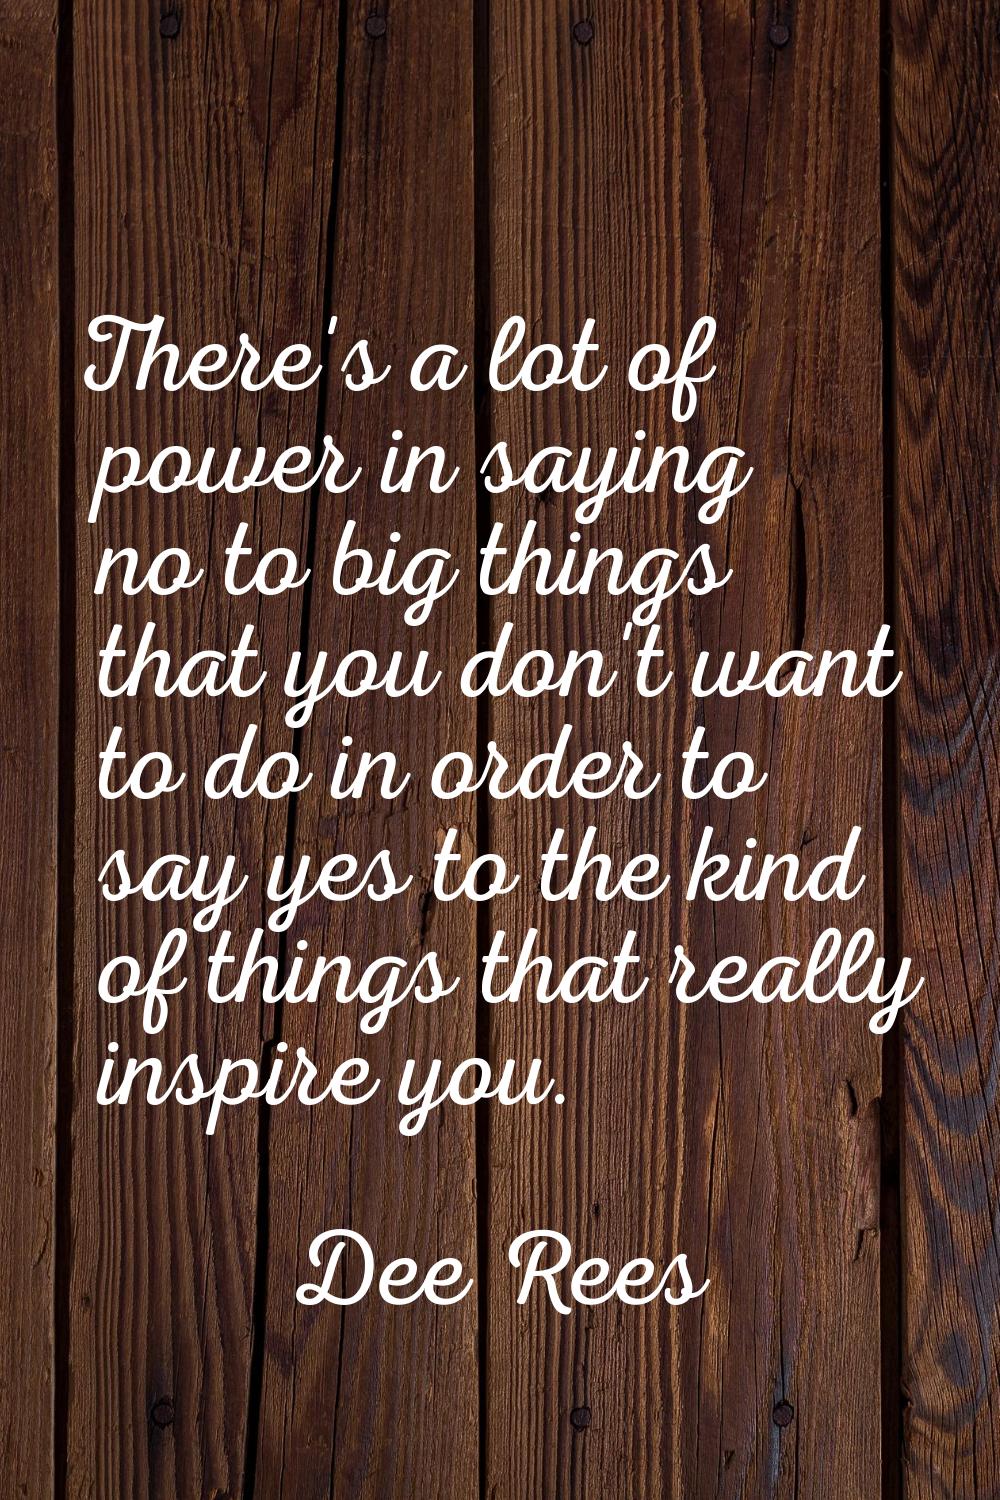 There's a lot of power in saying no to big things that you don't want to do in order to say yes to 